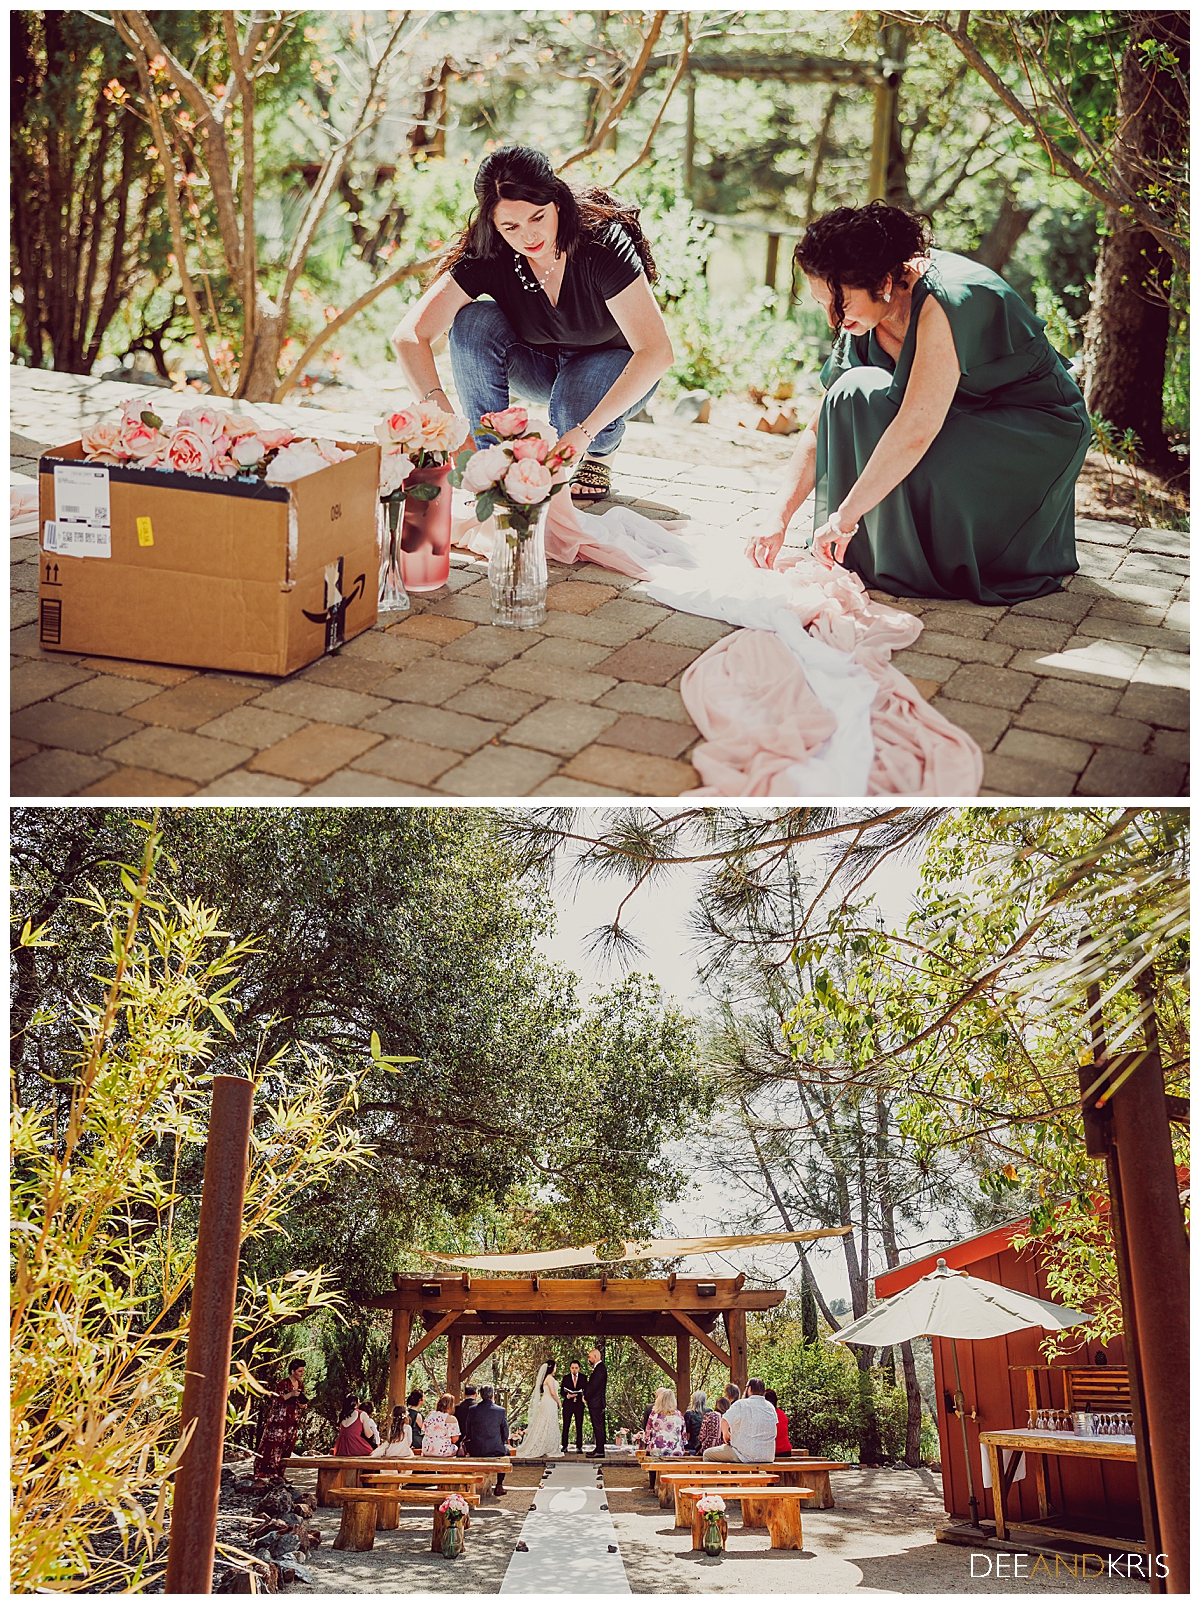 Two images: Top image of guests helping with backyard micro-wedding. Bottom image of micro-wedding ceremony